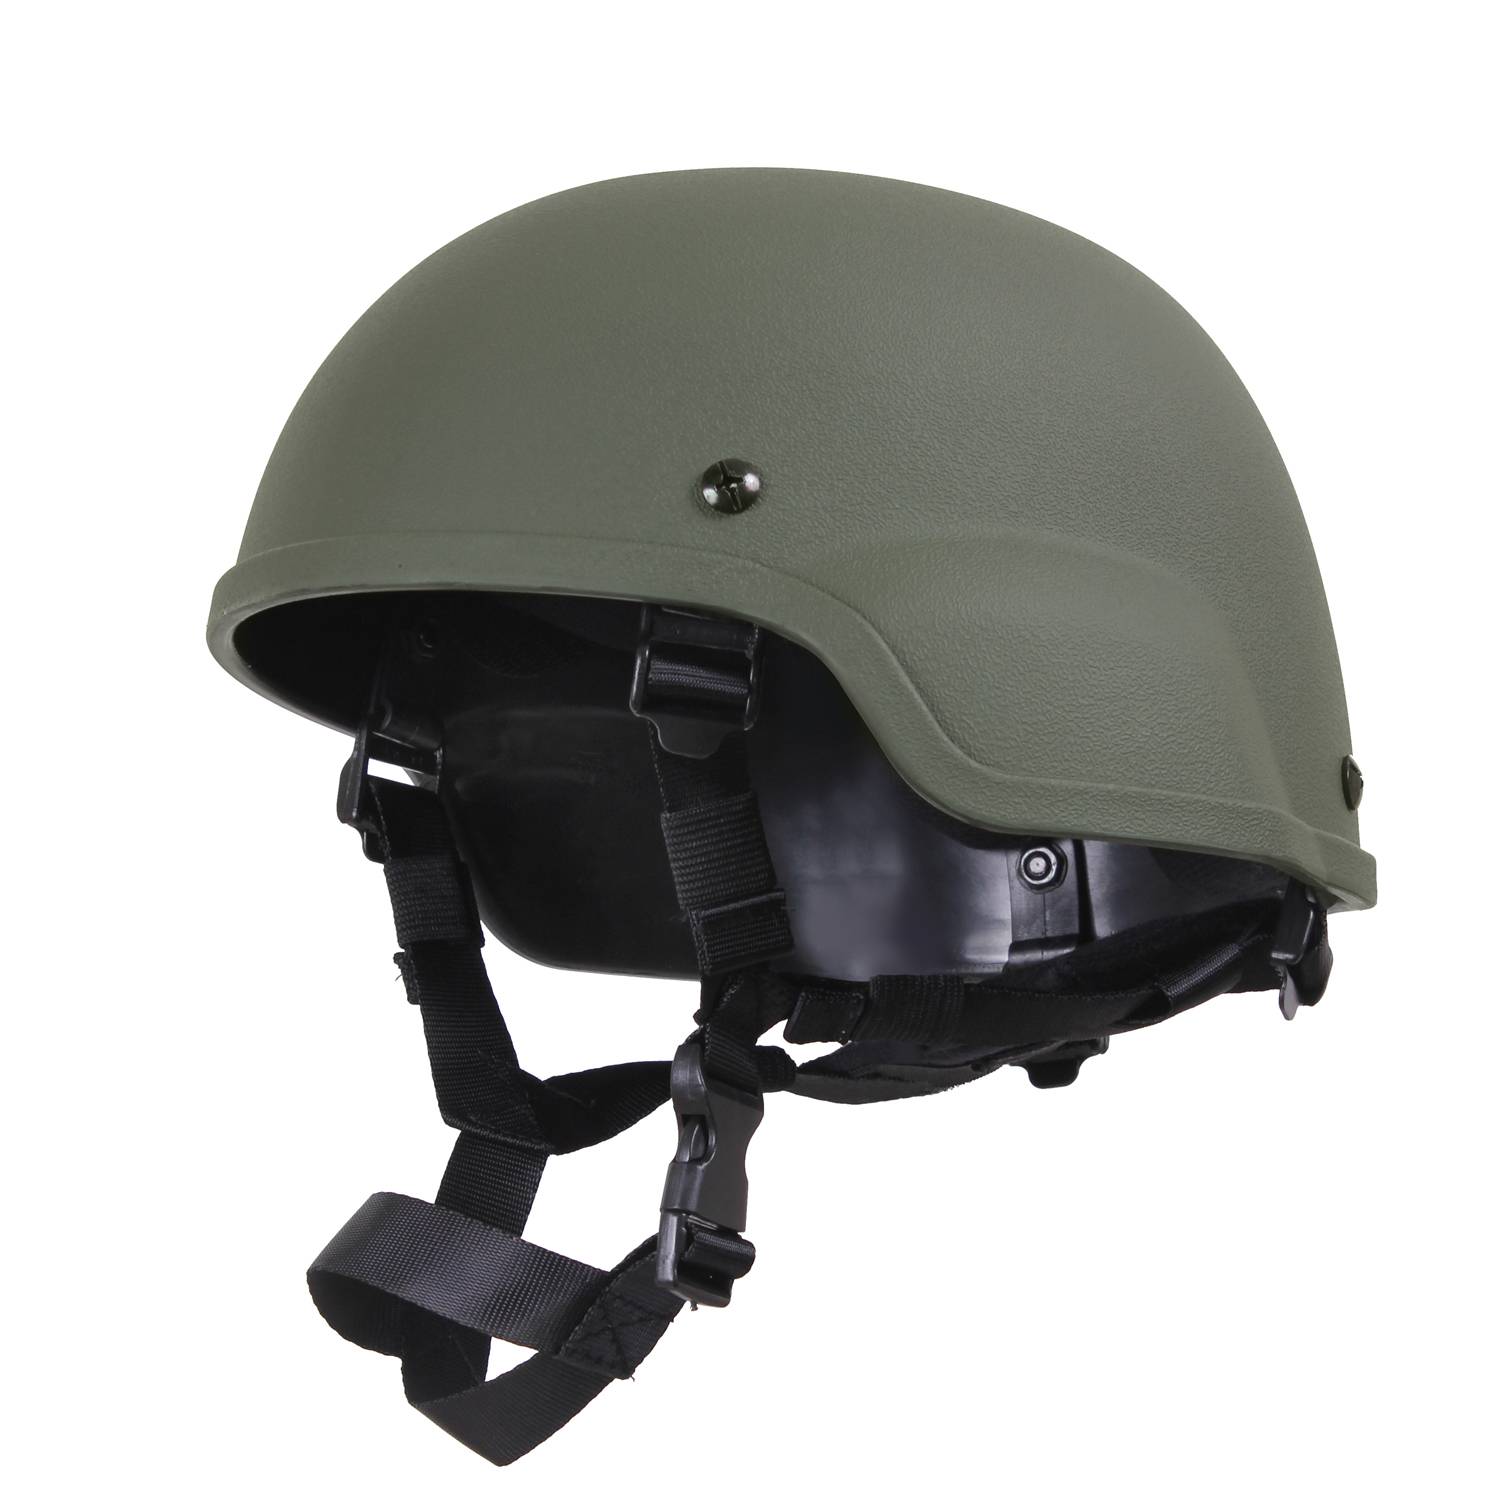 Rothco ABS MICH Replica Tactical Helmet